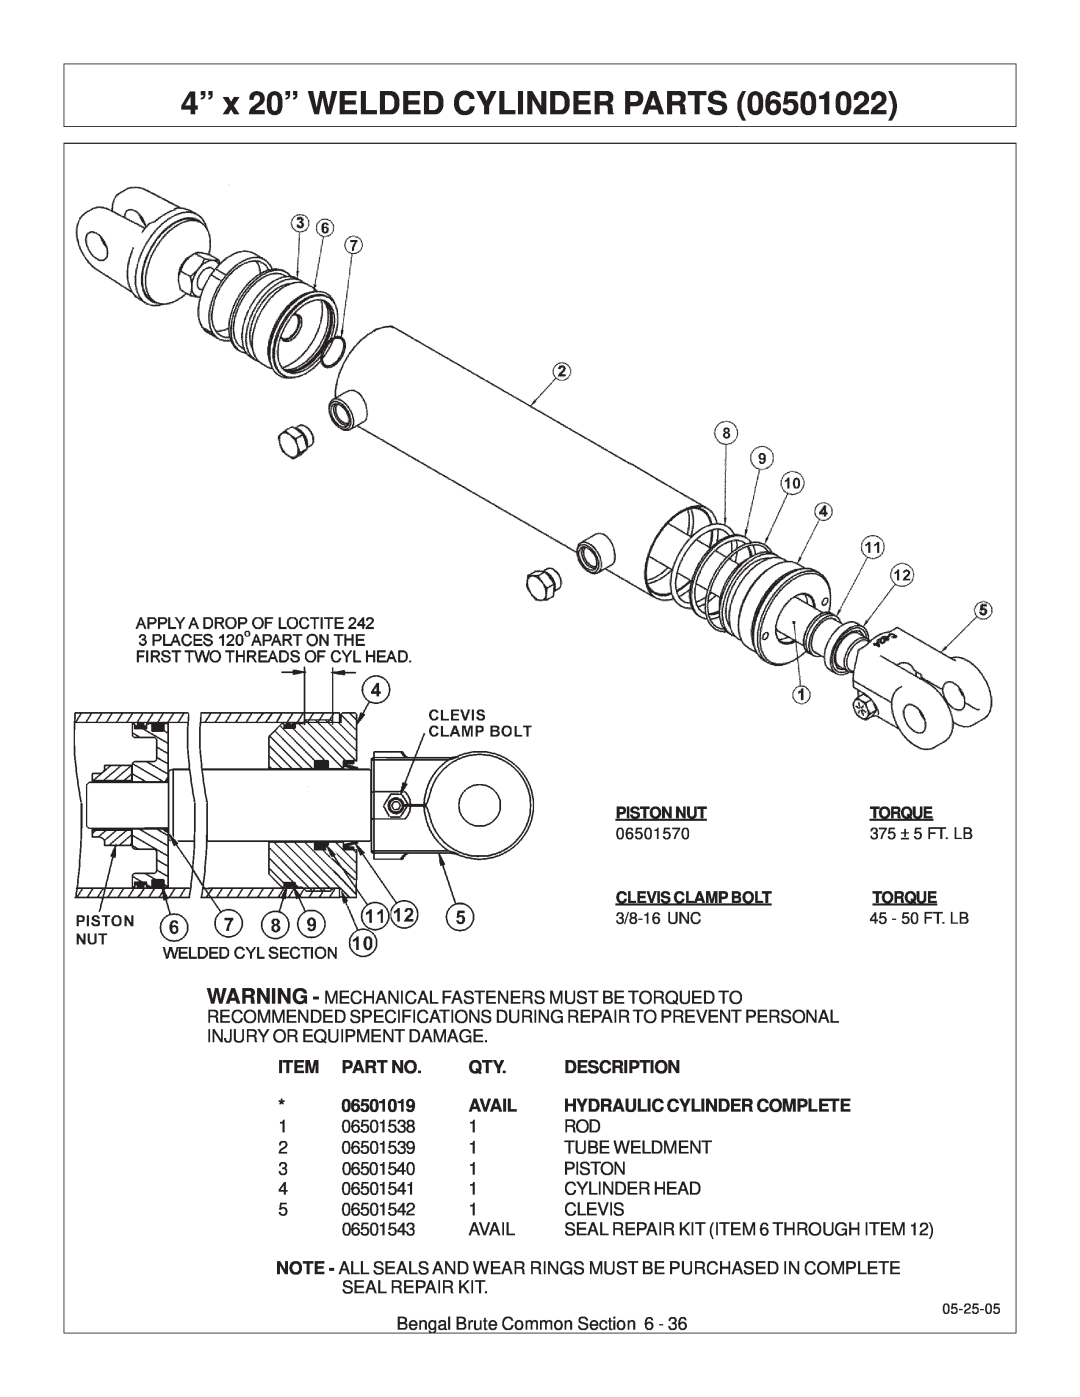 Tiger JD 62-6420 manual 4” x 20” WELDED CYLINDER PARTS, Description, 06501019, Avail, Hydraulic Cylinder Complete 